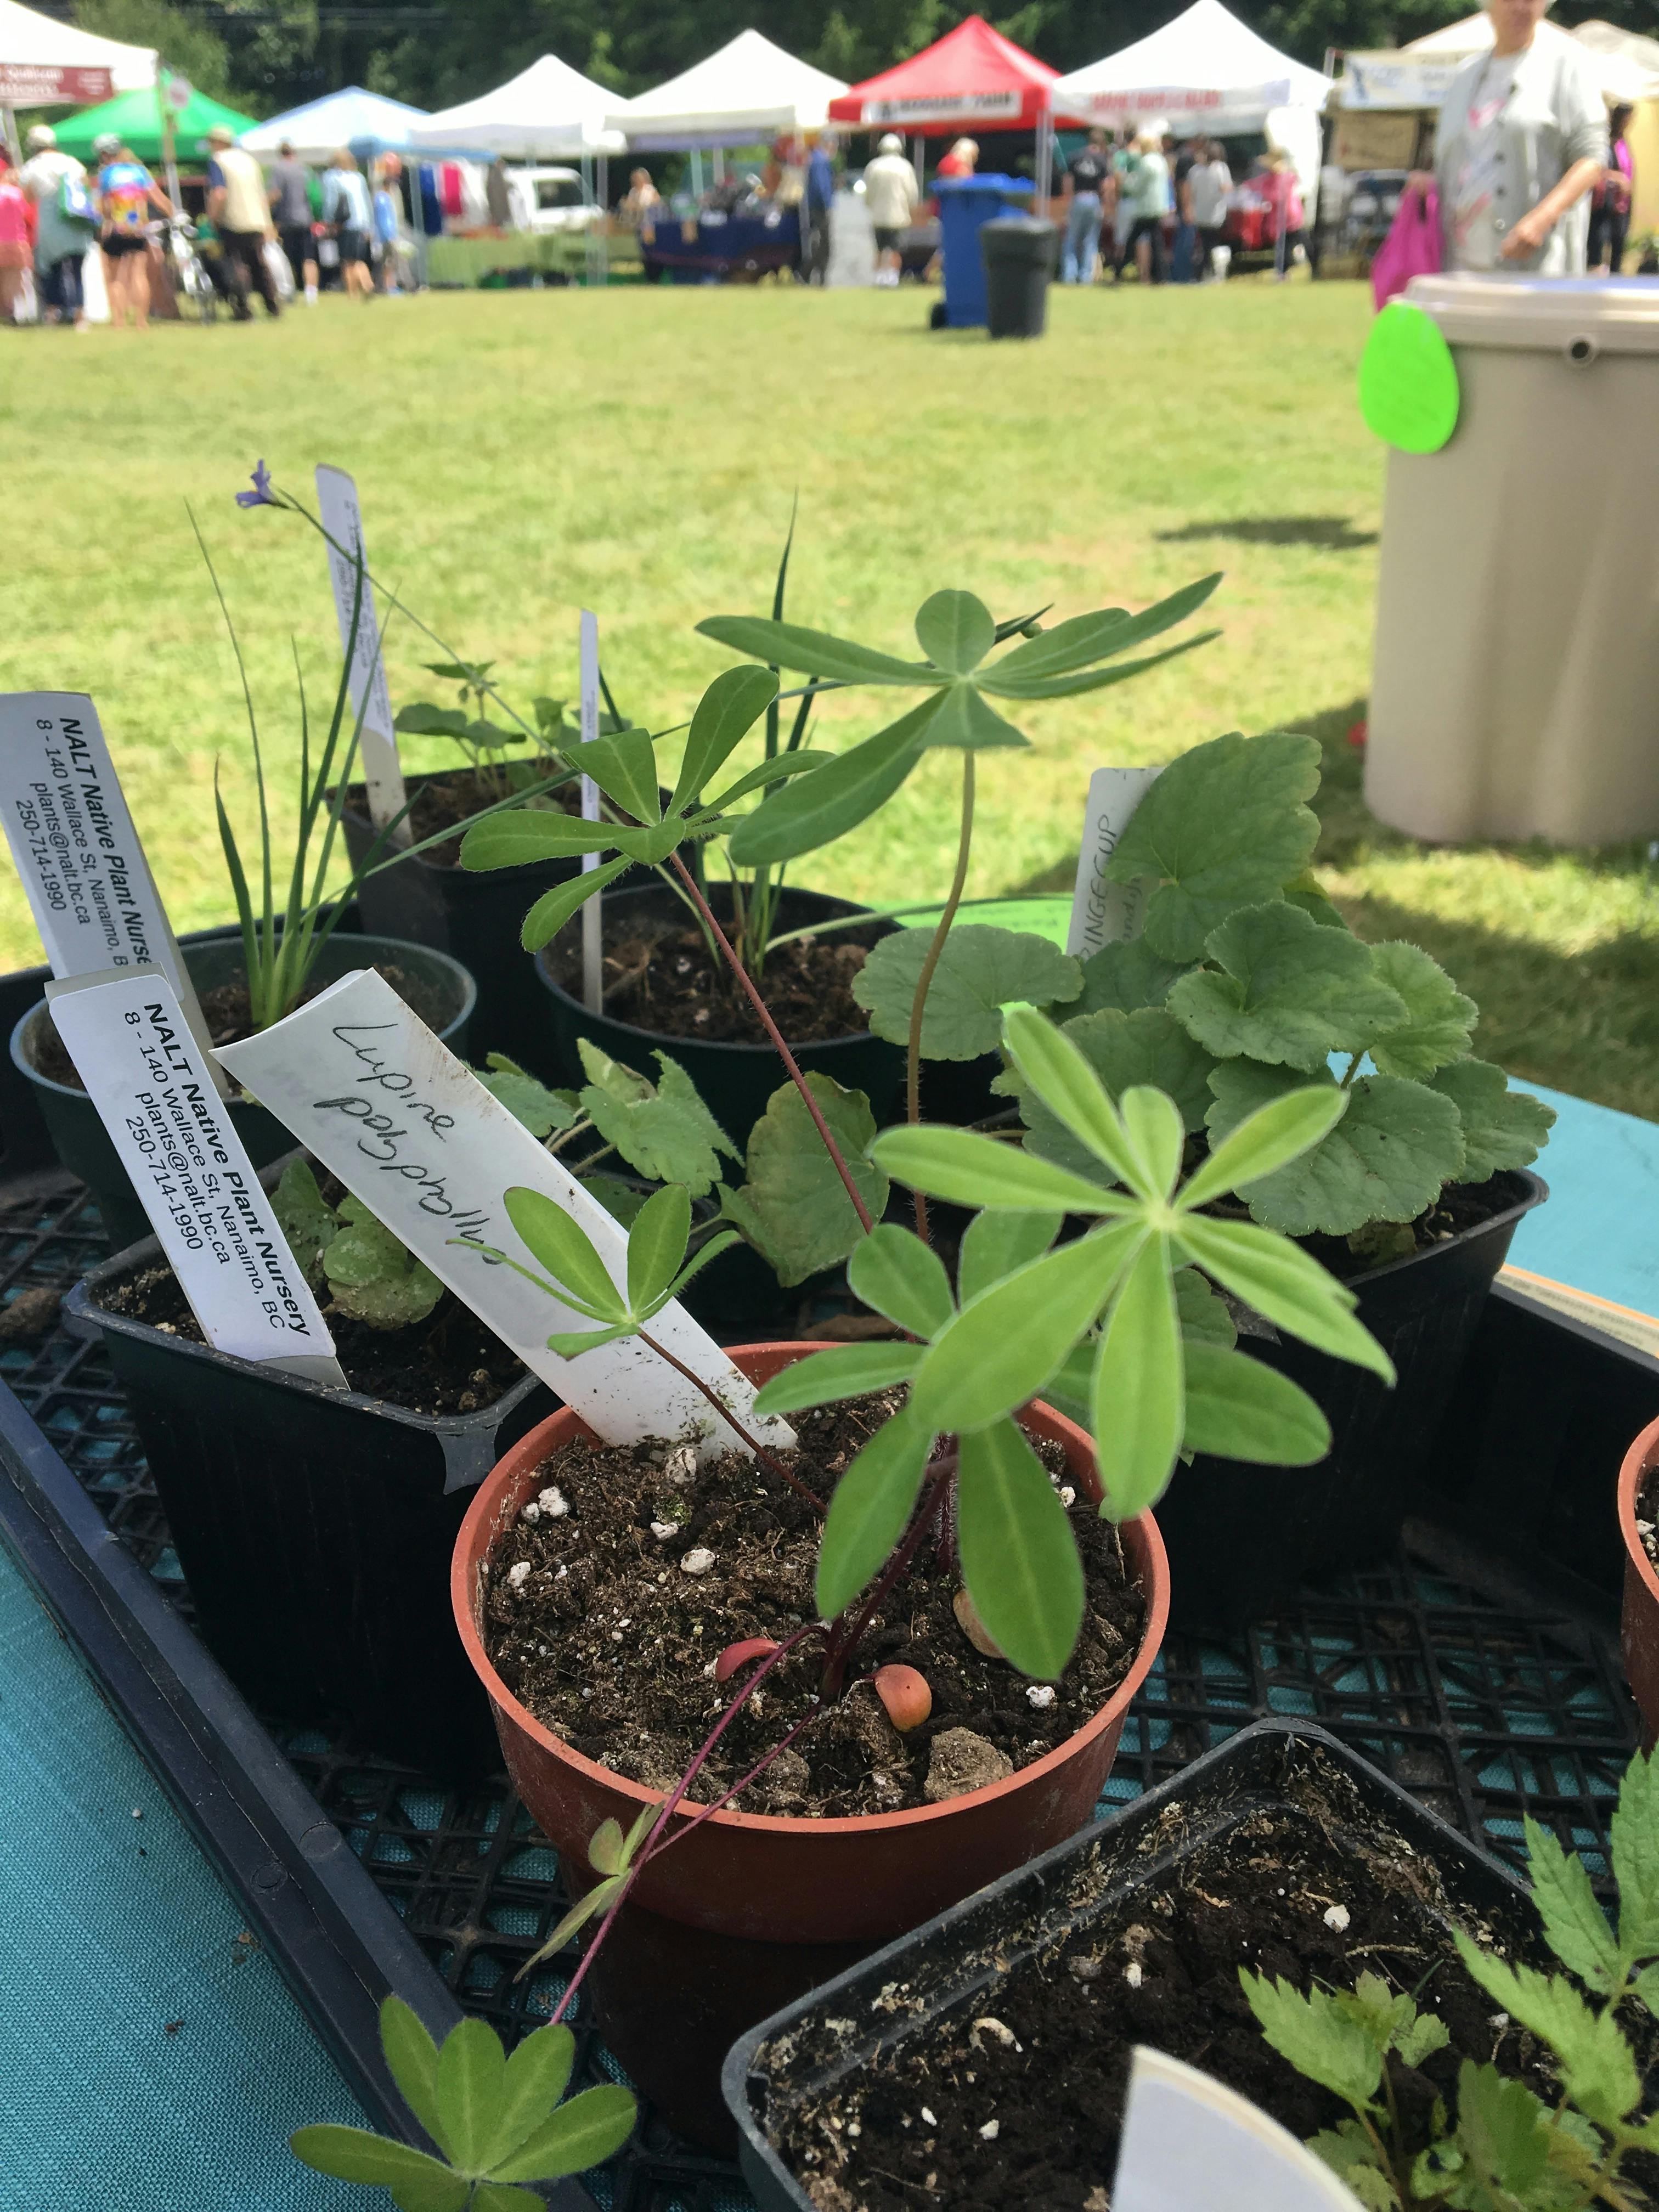 Planting native plant species is a great way to conserve water in our gardens. Pick up a free native plant from the Team WaterSmart booth!